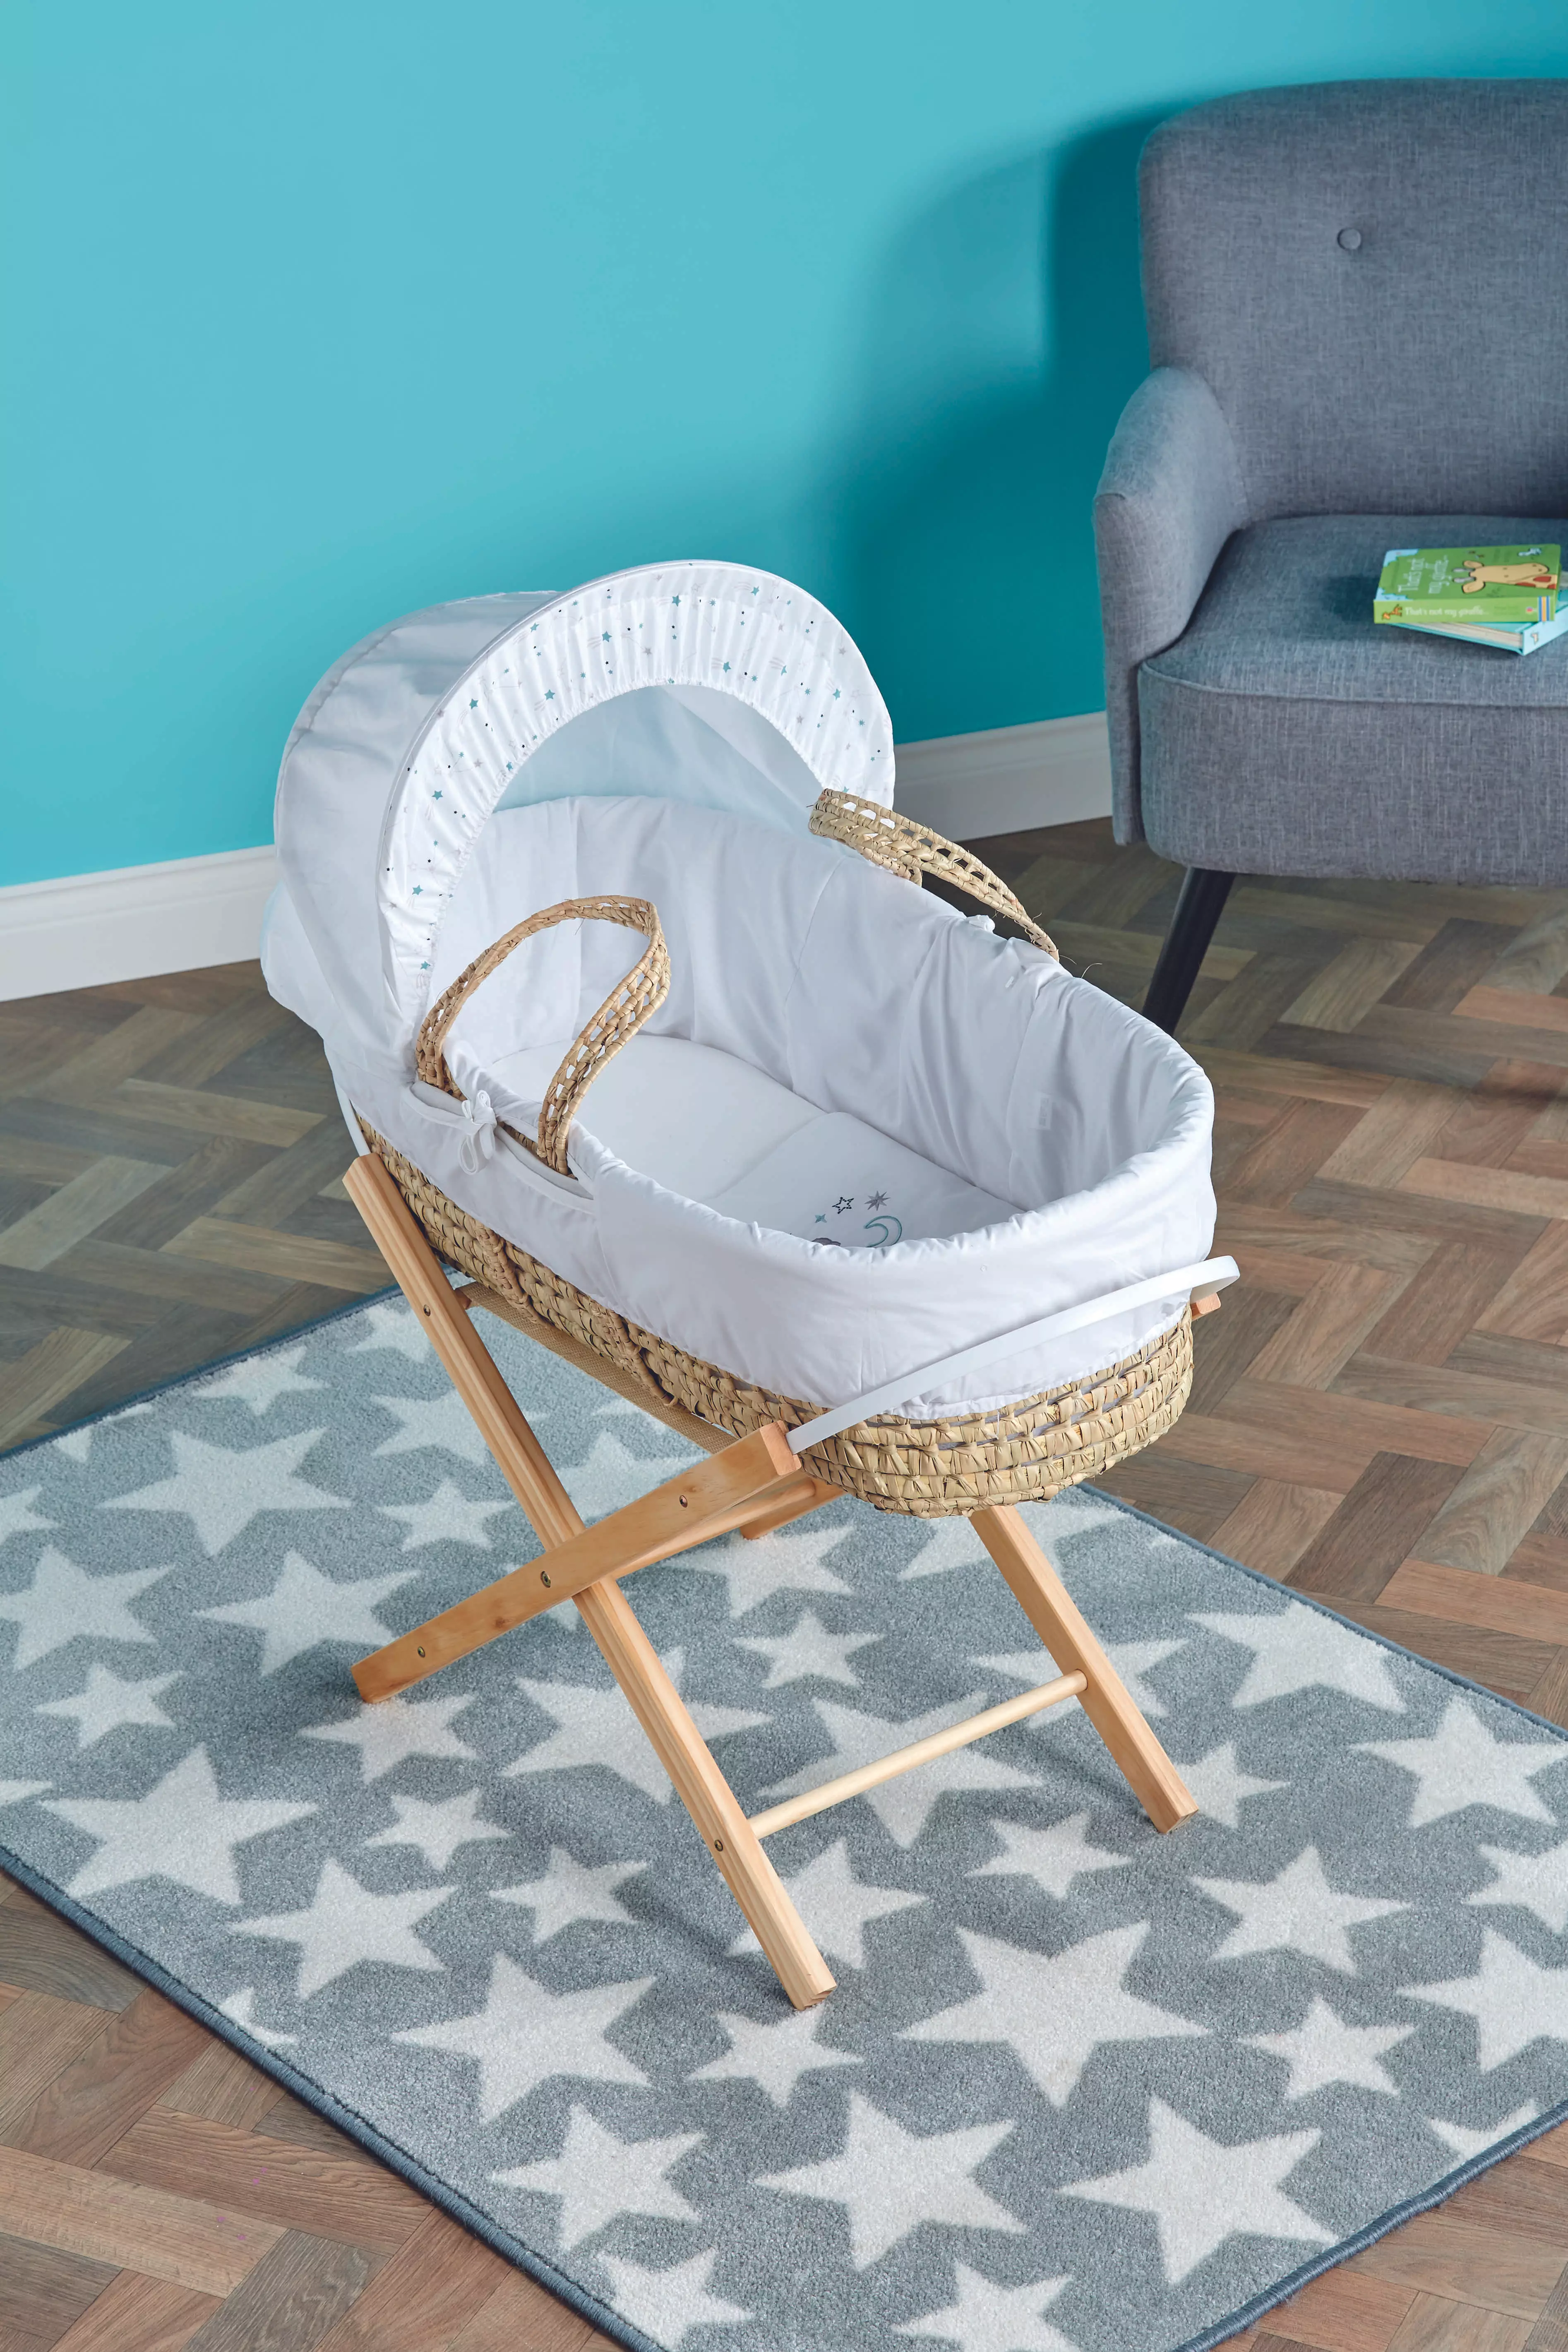 The moses basket is priced at £29.99 (